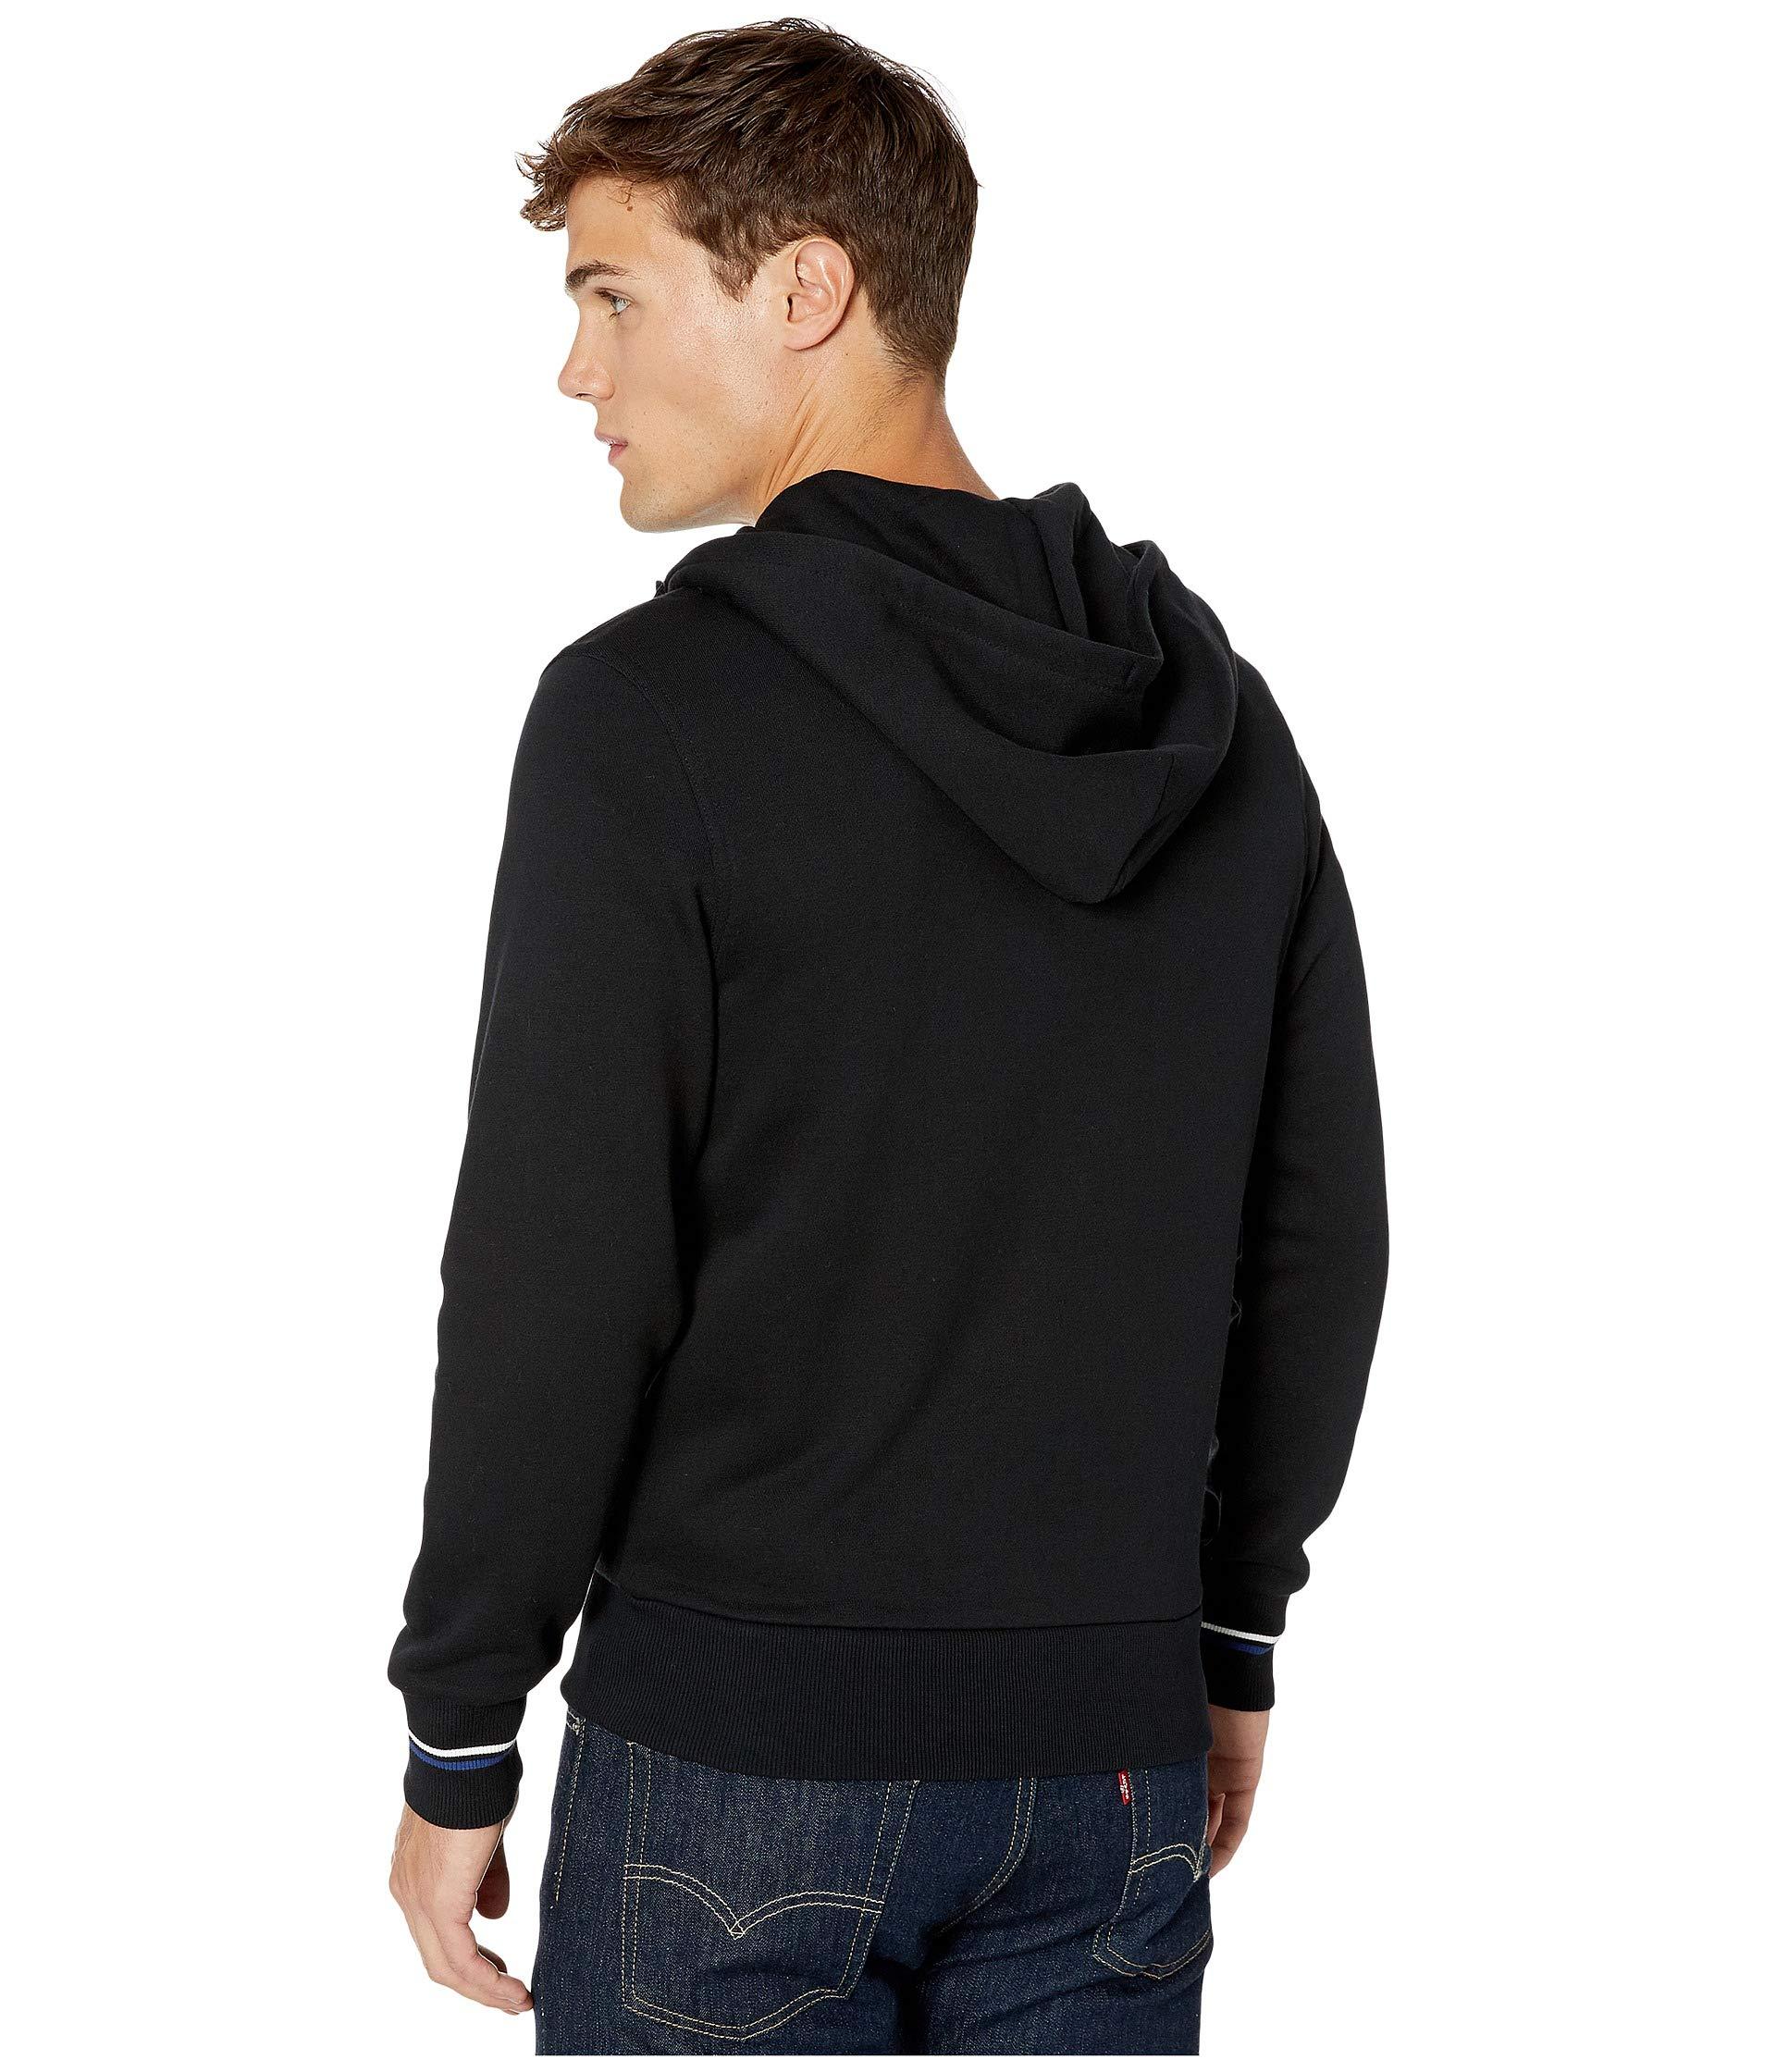 Fred Perry Cotton Hooded Zip Through Sweatshirt in Black for Men - Lyst